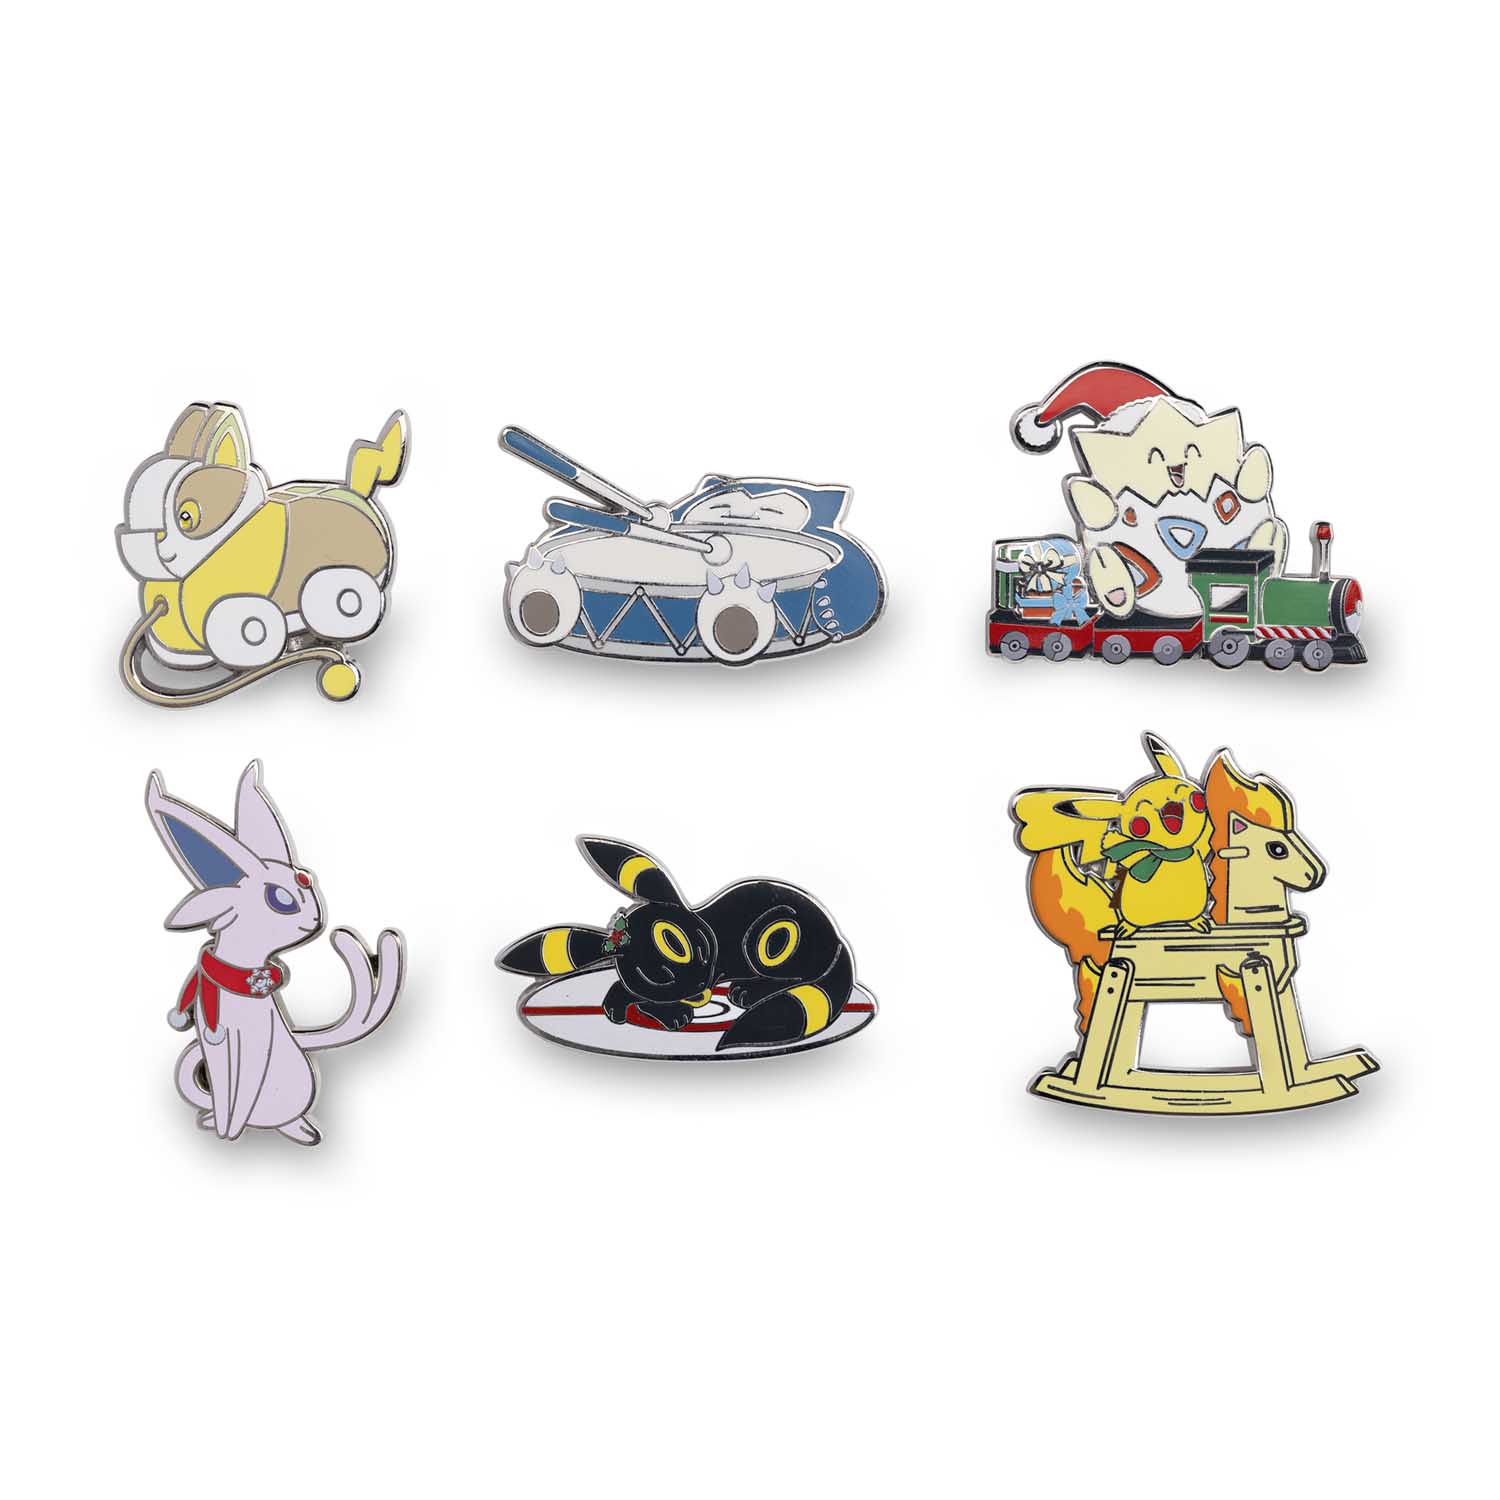 Winter and Christmas merch coming to Pokémon Centers in Japan – Nintendo  Wire